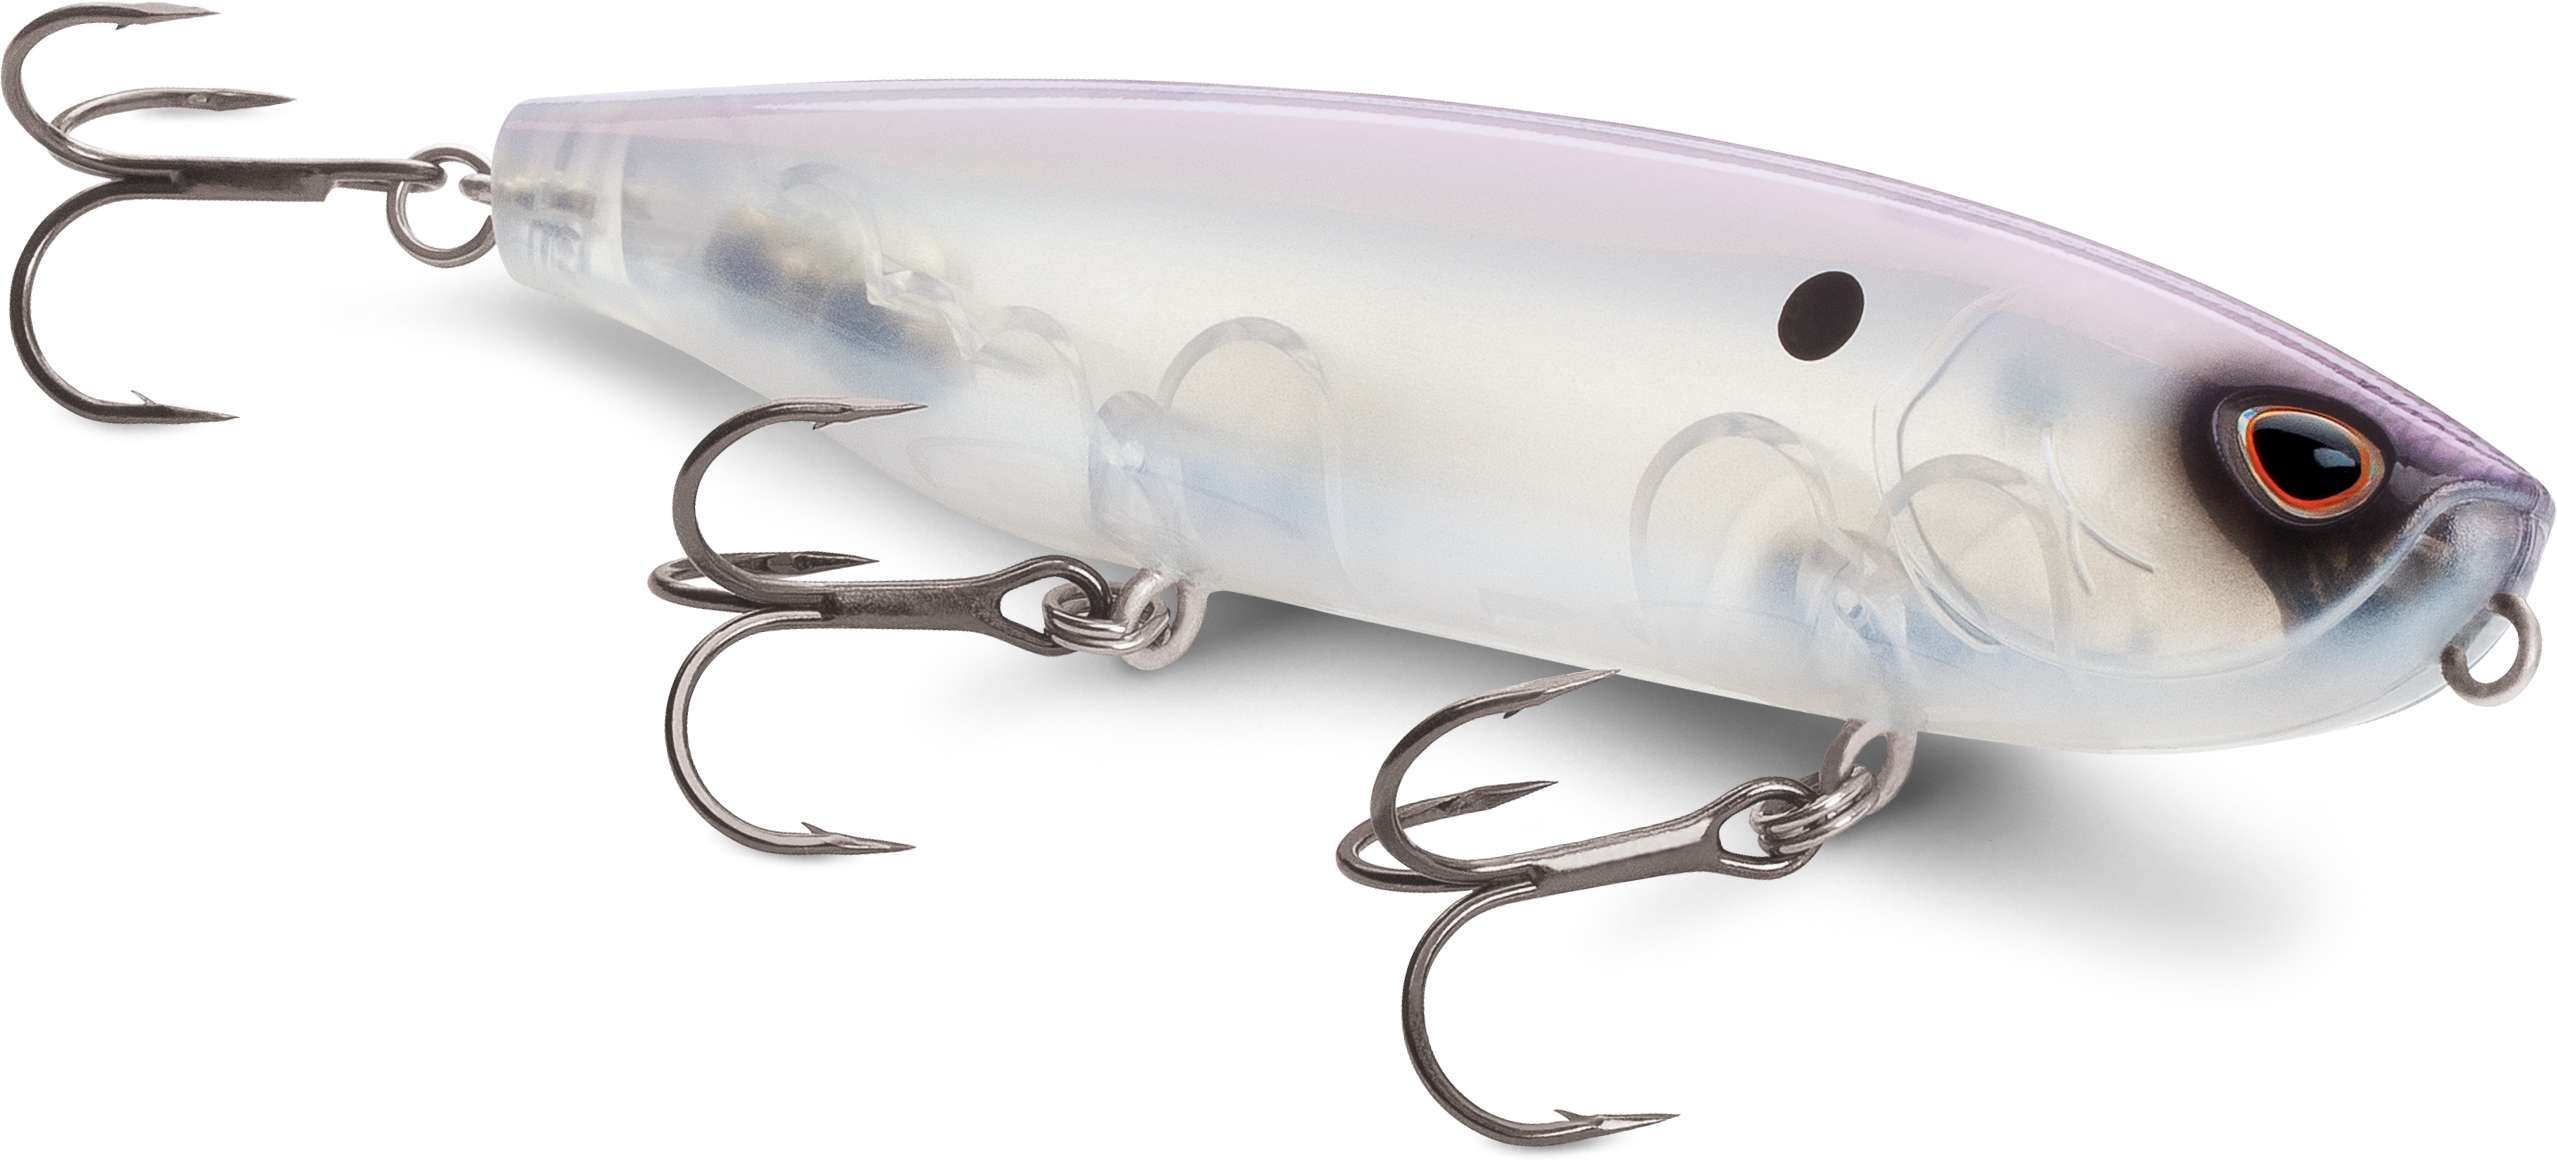 <b>Storm</b><br>Arashi Top Walker<br>	This topwater lure features a responsoive walking action that Storm says will stay true even in choppy water. Multiple rattles make it sound like a baitfish party is going on, and your next big fish is invited. Ten different colors and two sizes (11 and 13) will be available. 